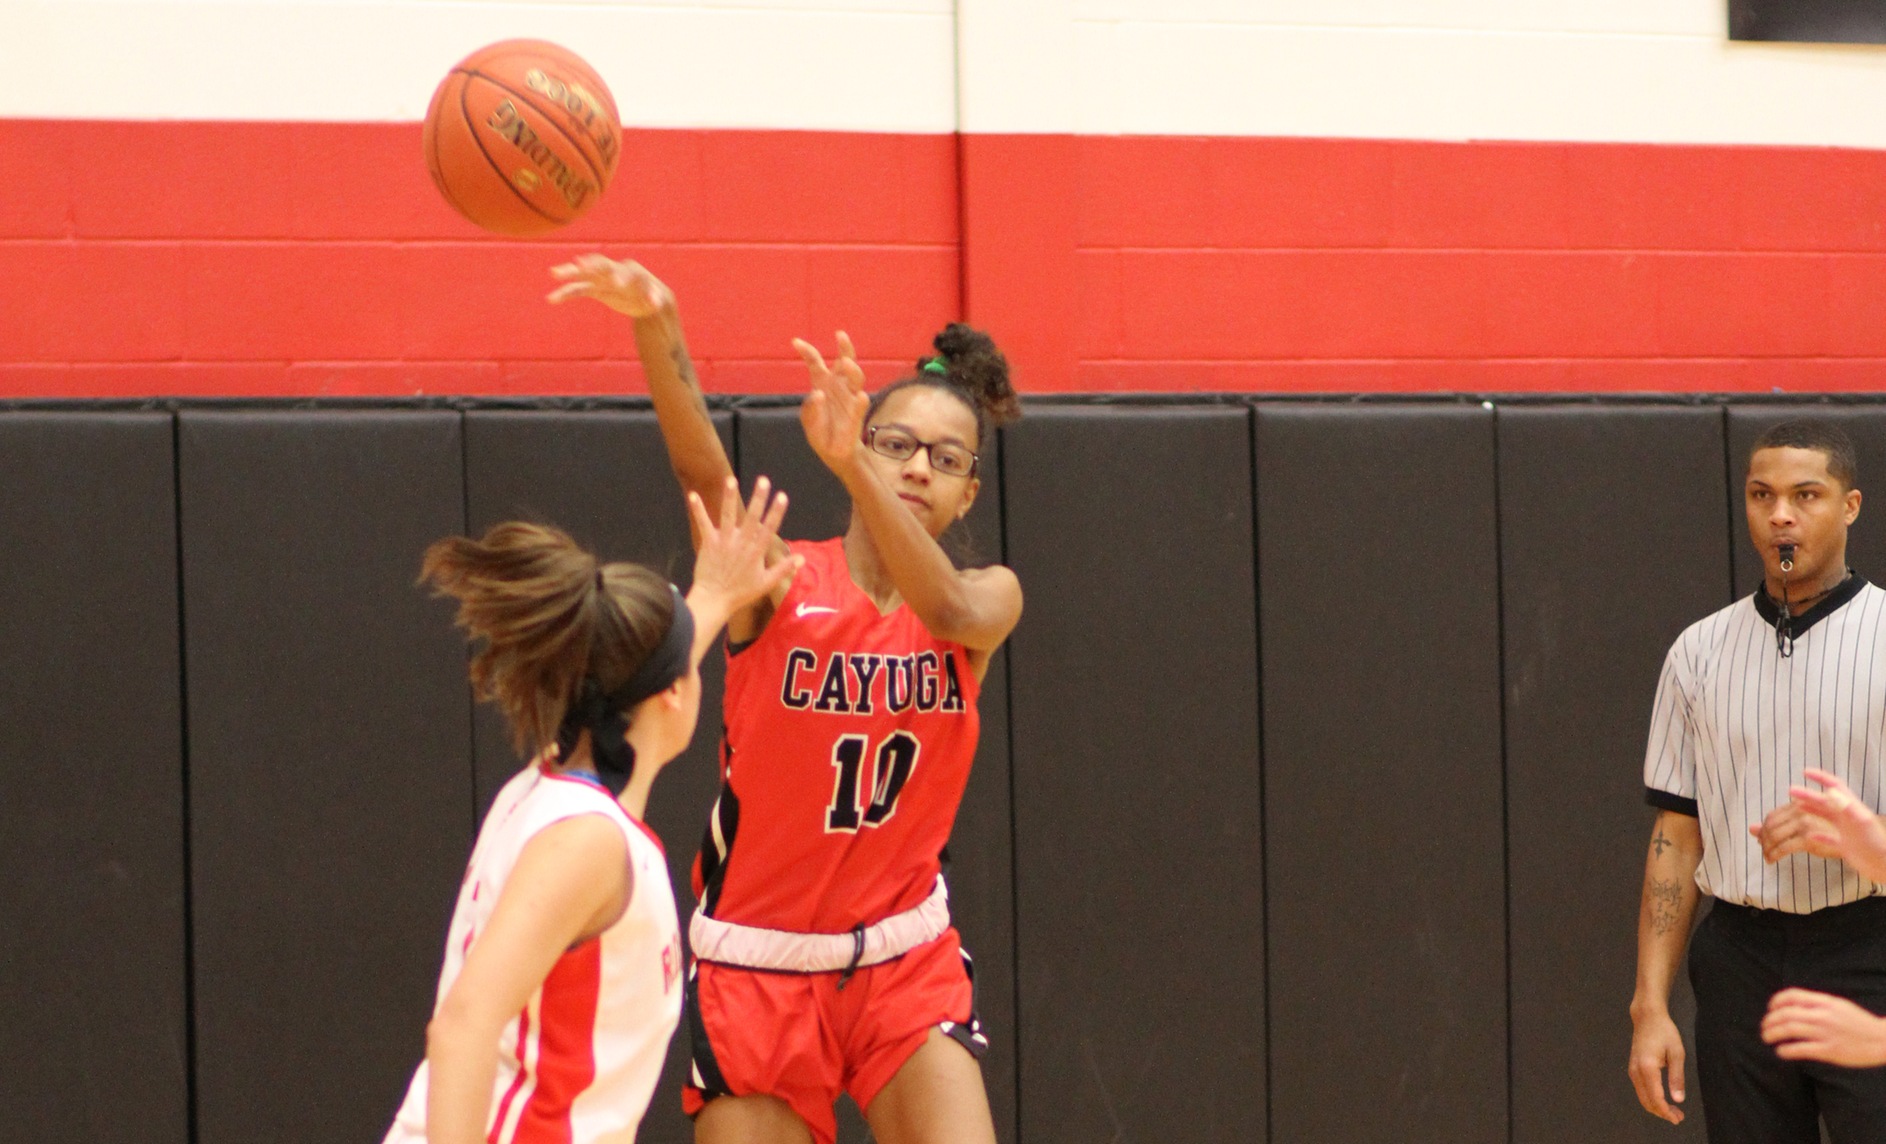 Fatimaah Findley had 13 points and 6 rebounds for Cayuga in a tough home loss to Herkimer.